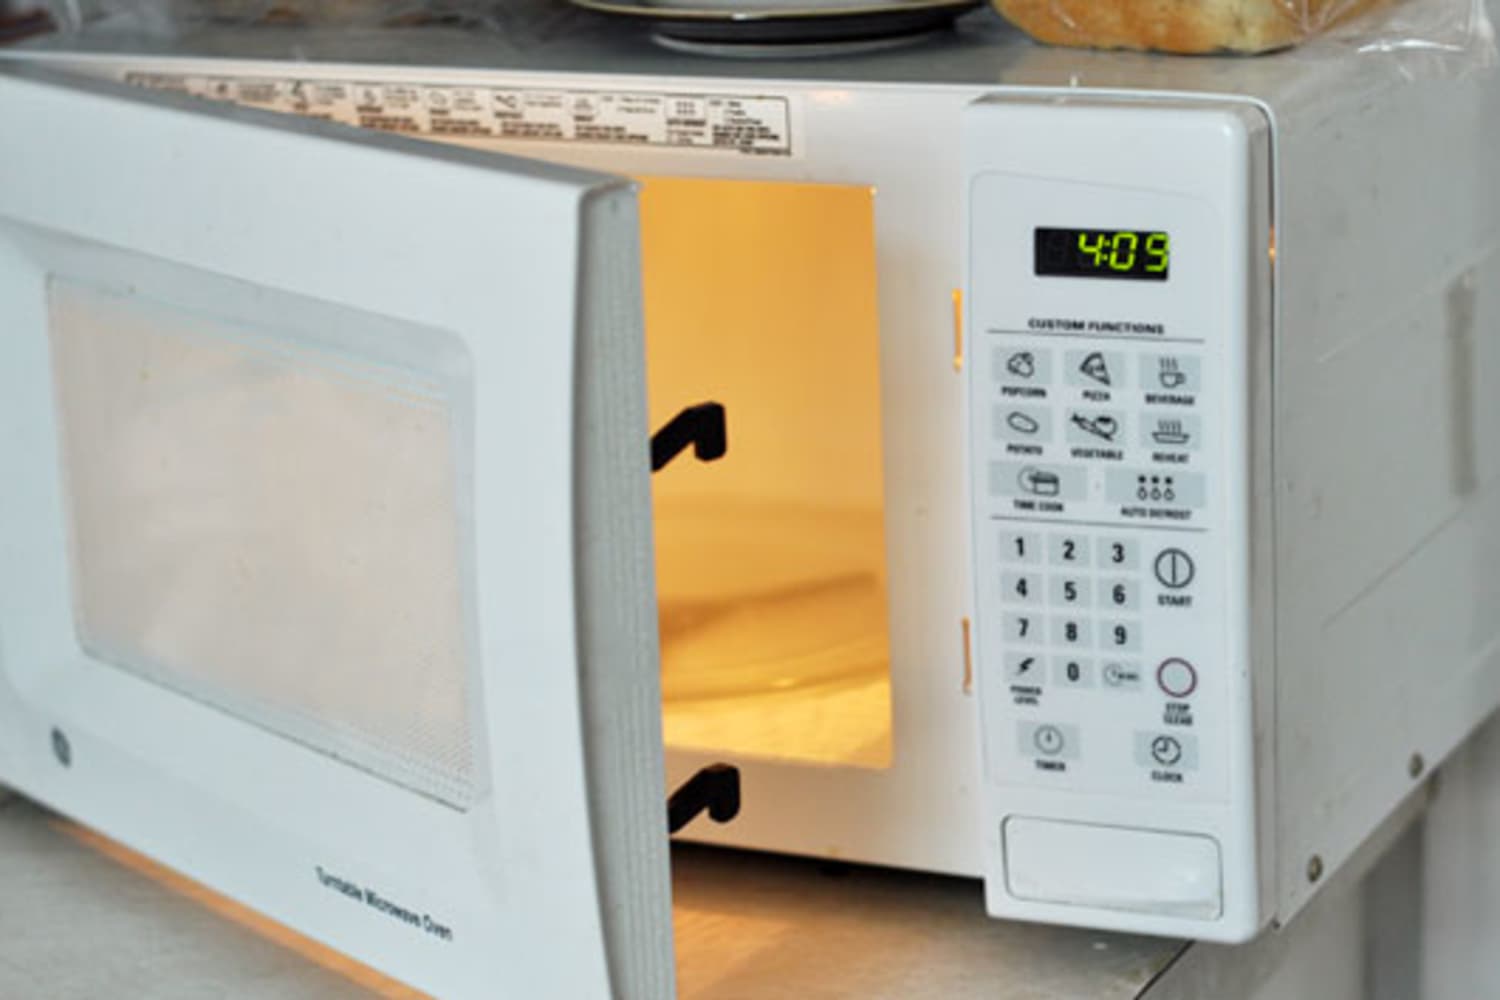 Is Microwaving Bad? - Plant-Based Cooking